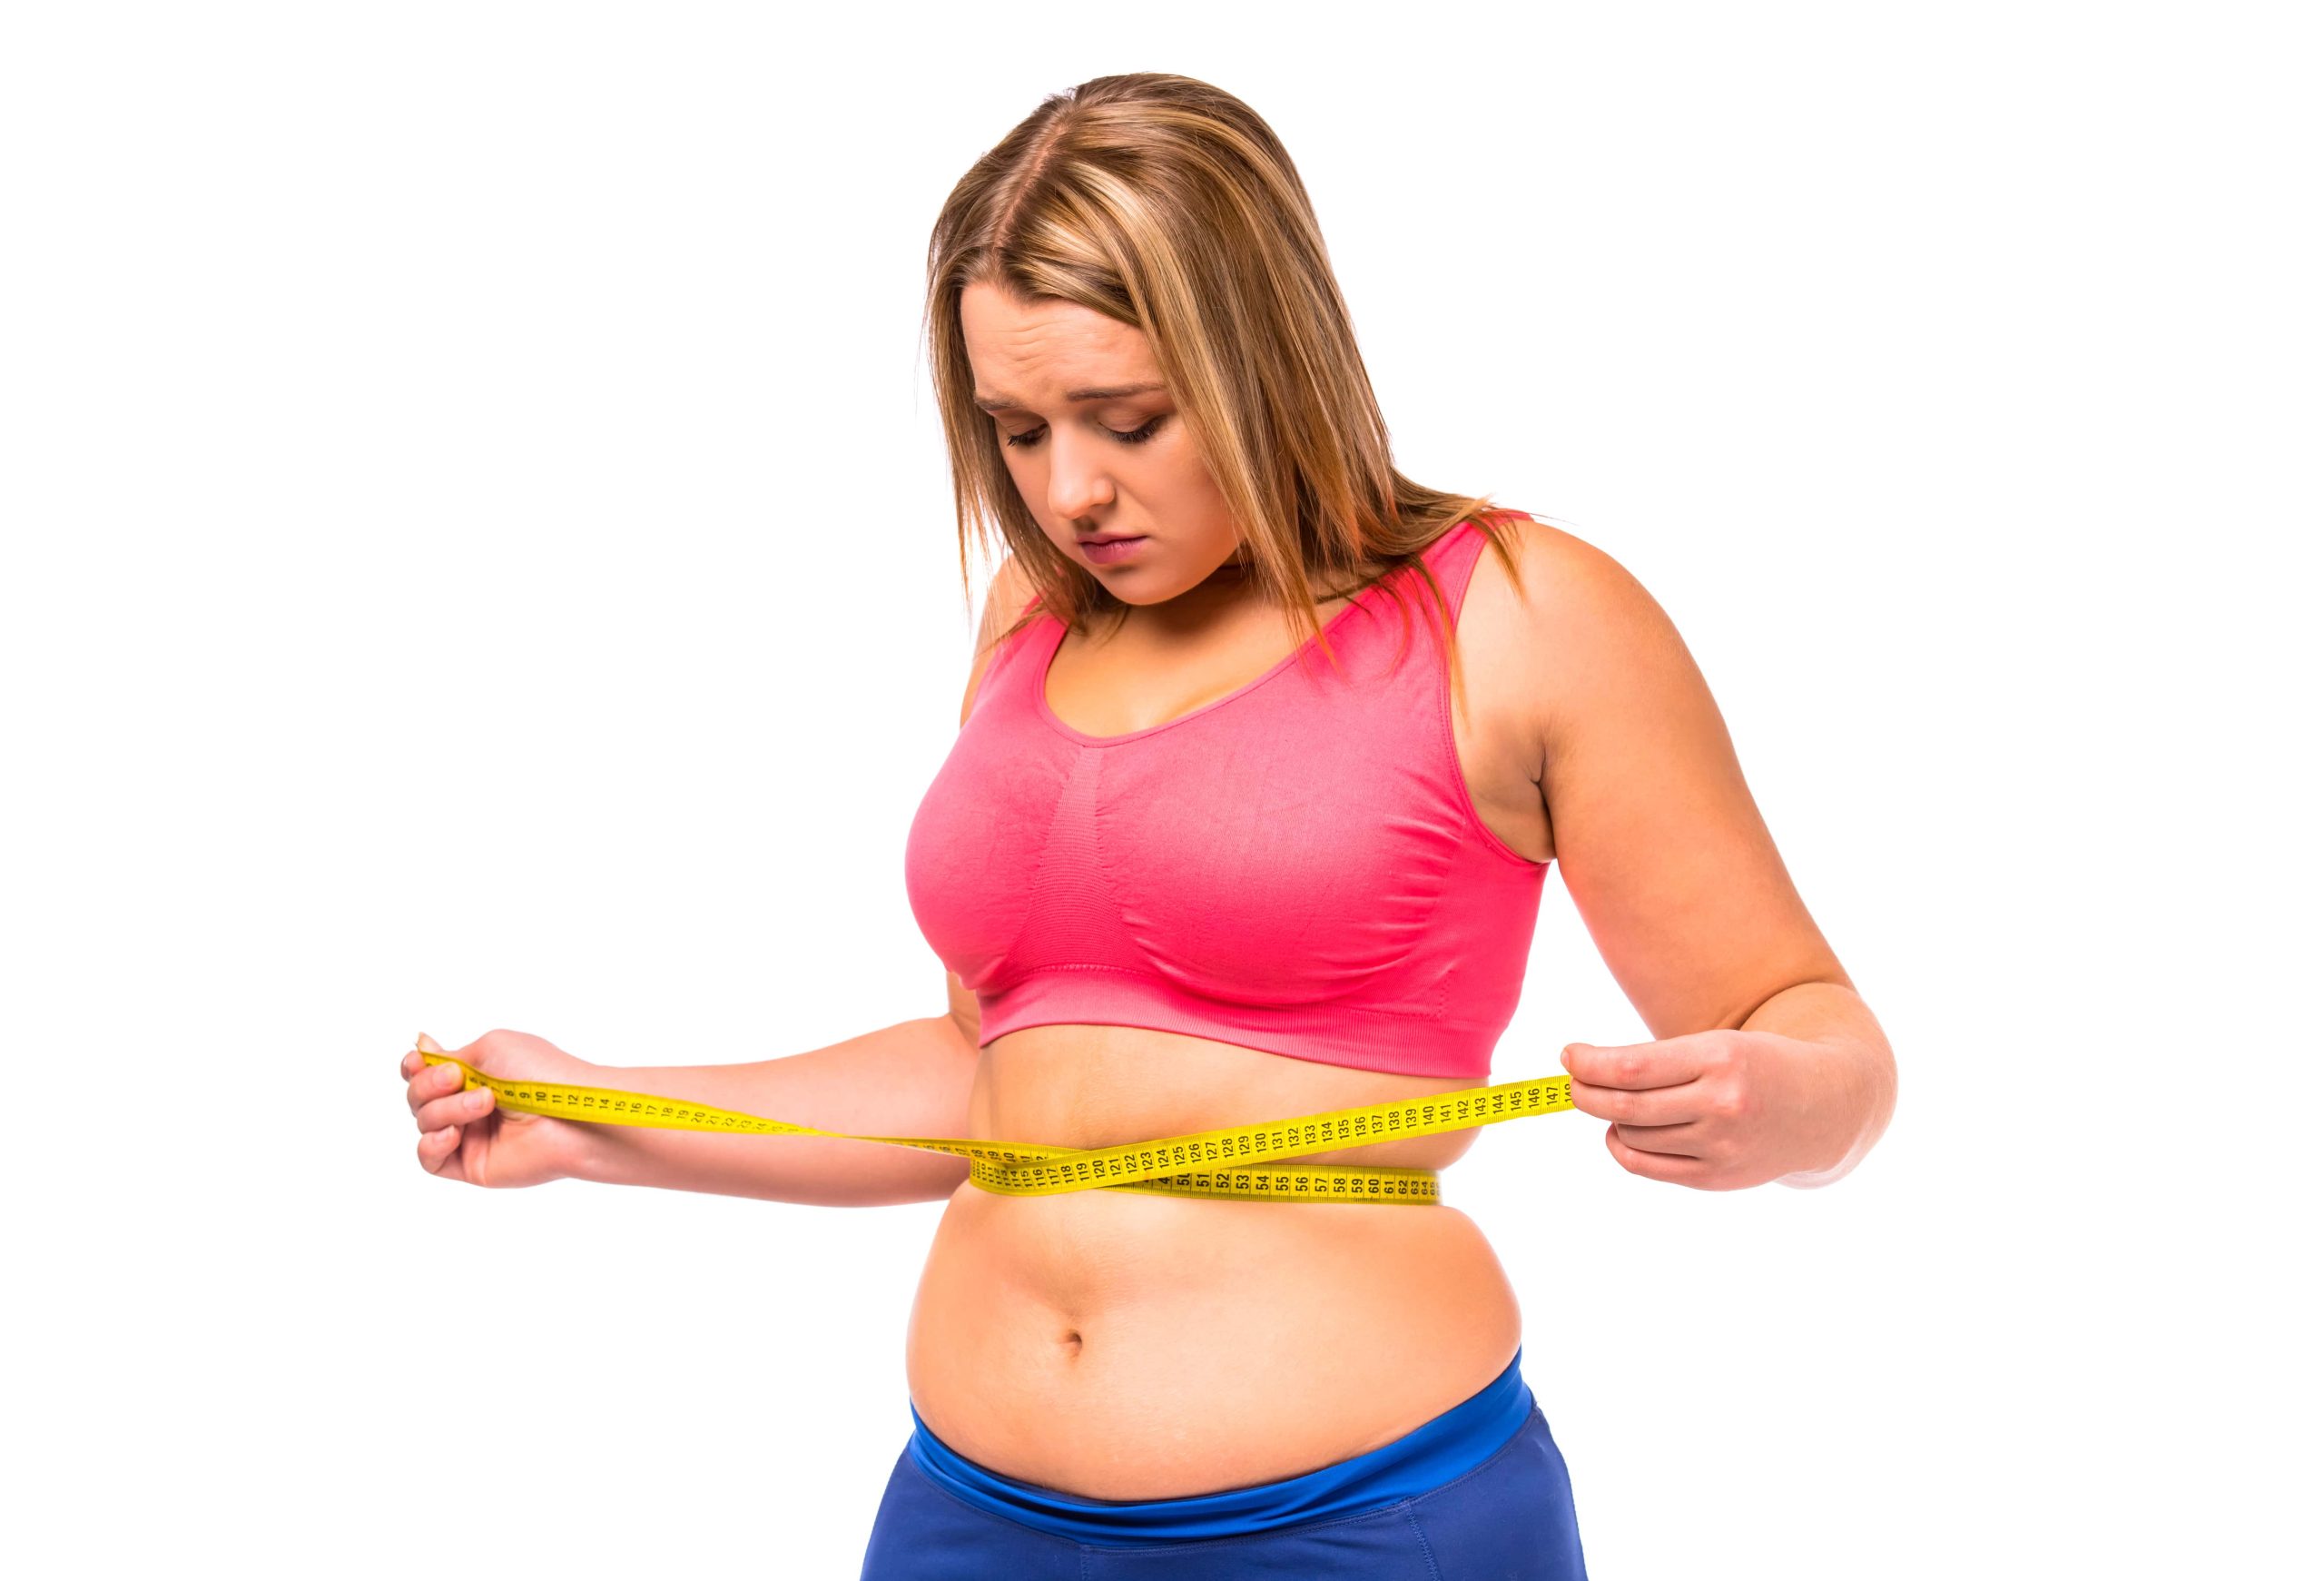 How BodyTite Can Help You Eliminate Unwanted Body Fat